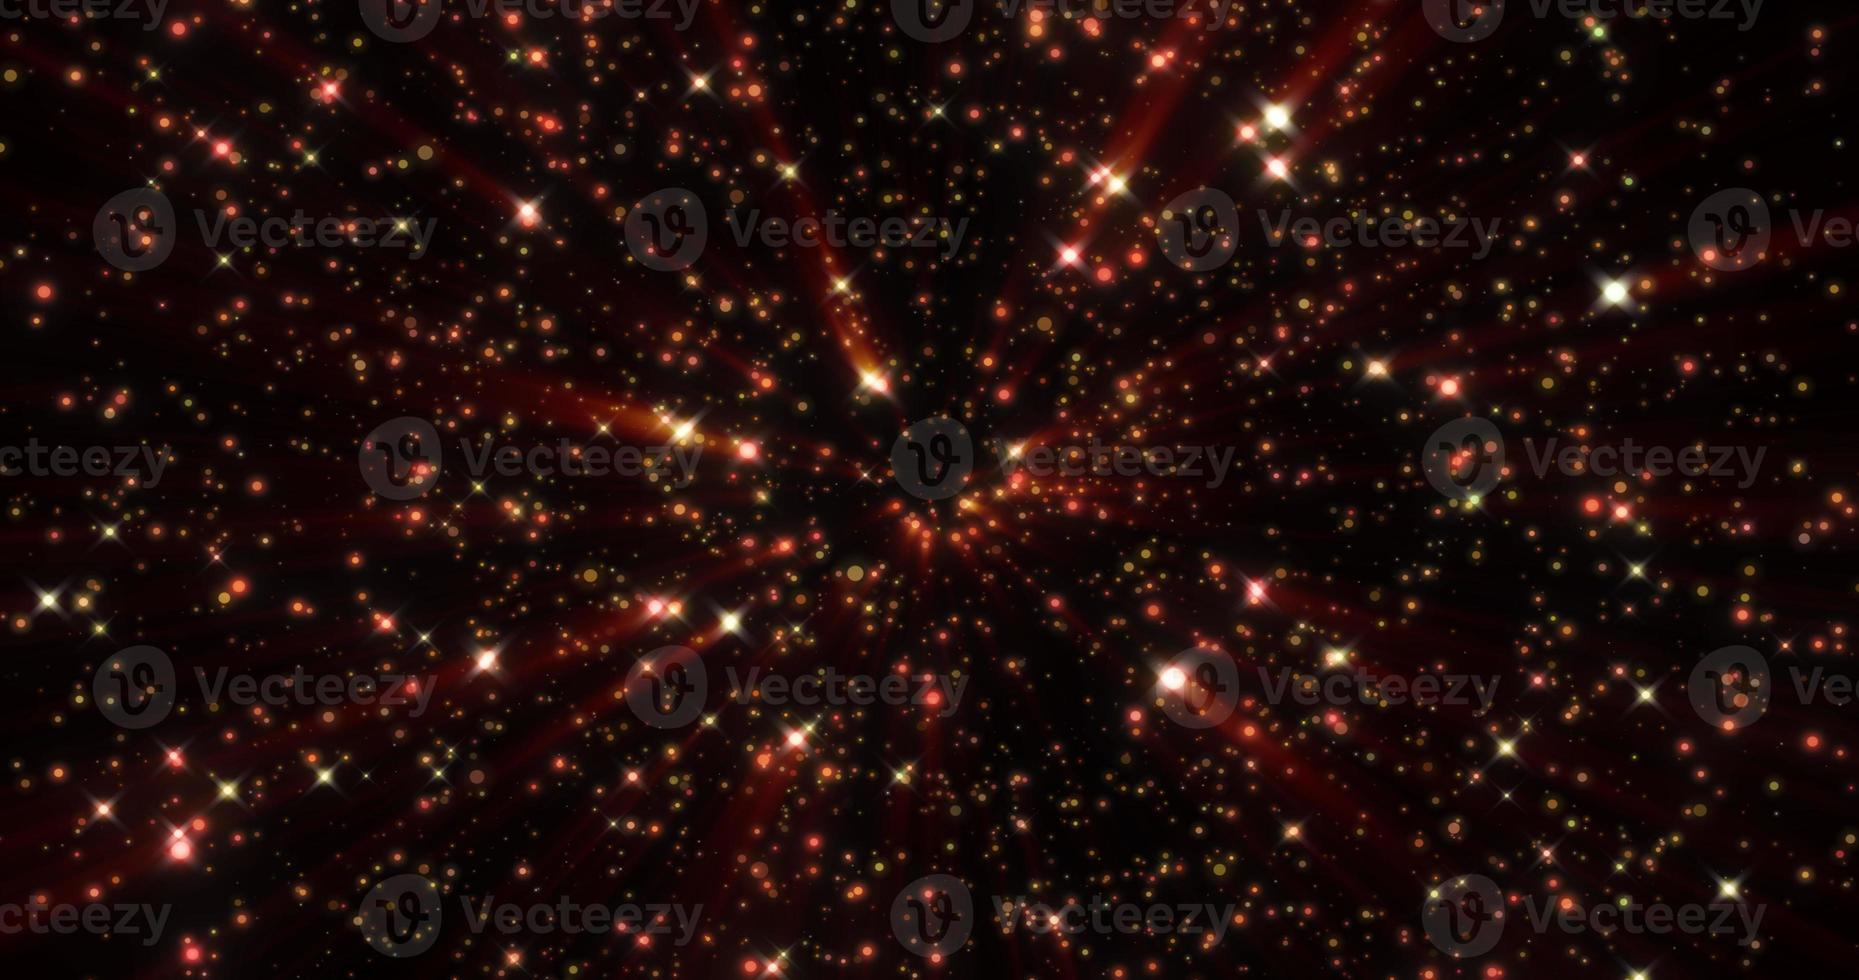 Abstract background of bright orange glowing shiny bright dots of stars and beautiful festive space moving circles photo